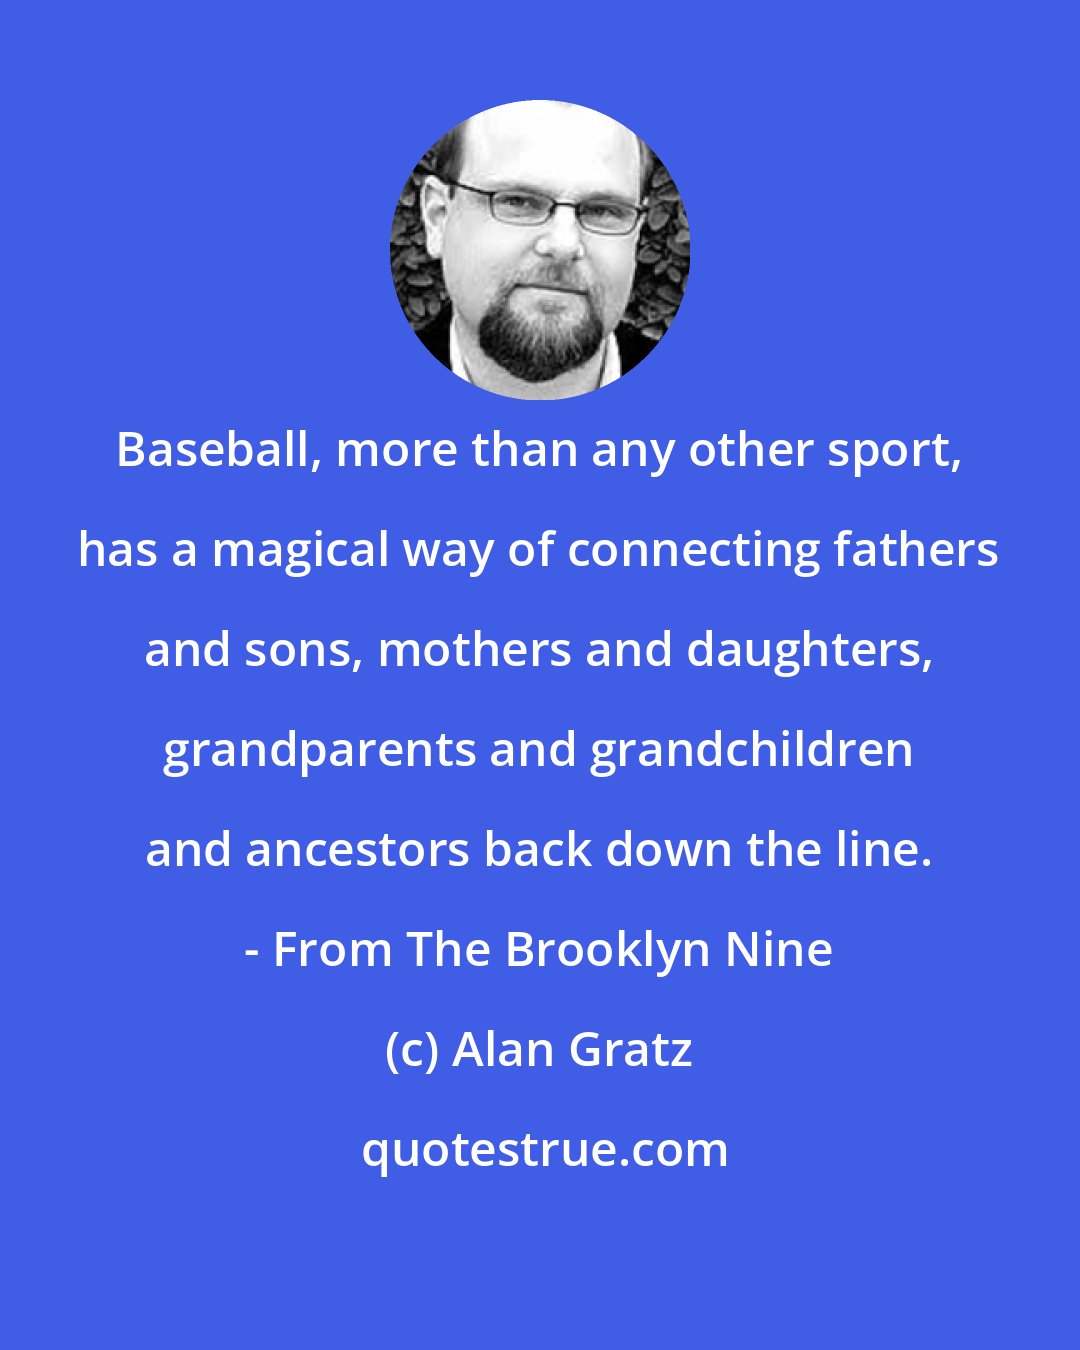 Alan Gratz: Baseball, more than any other sport, has a magical way of connecting fathers and sons, mothers and daughters, grandparents and grandchildren and ancestors back down the line. - From The Brooklyn Nine